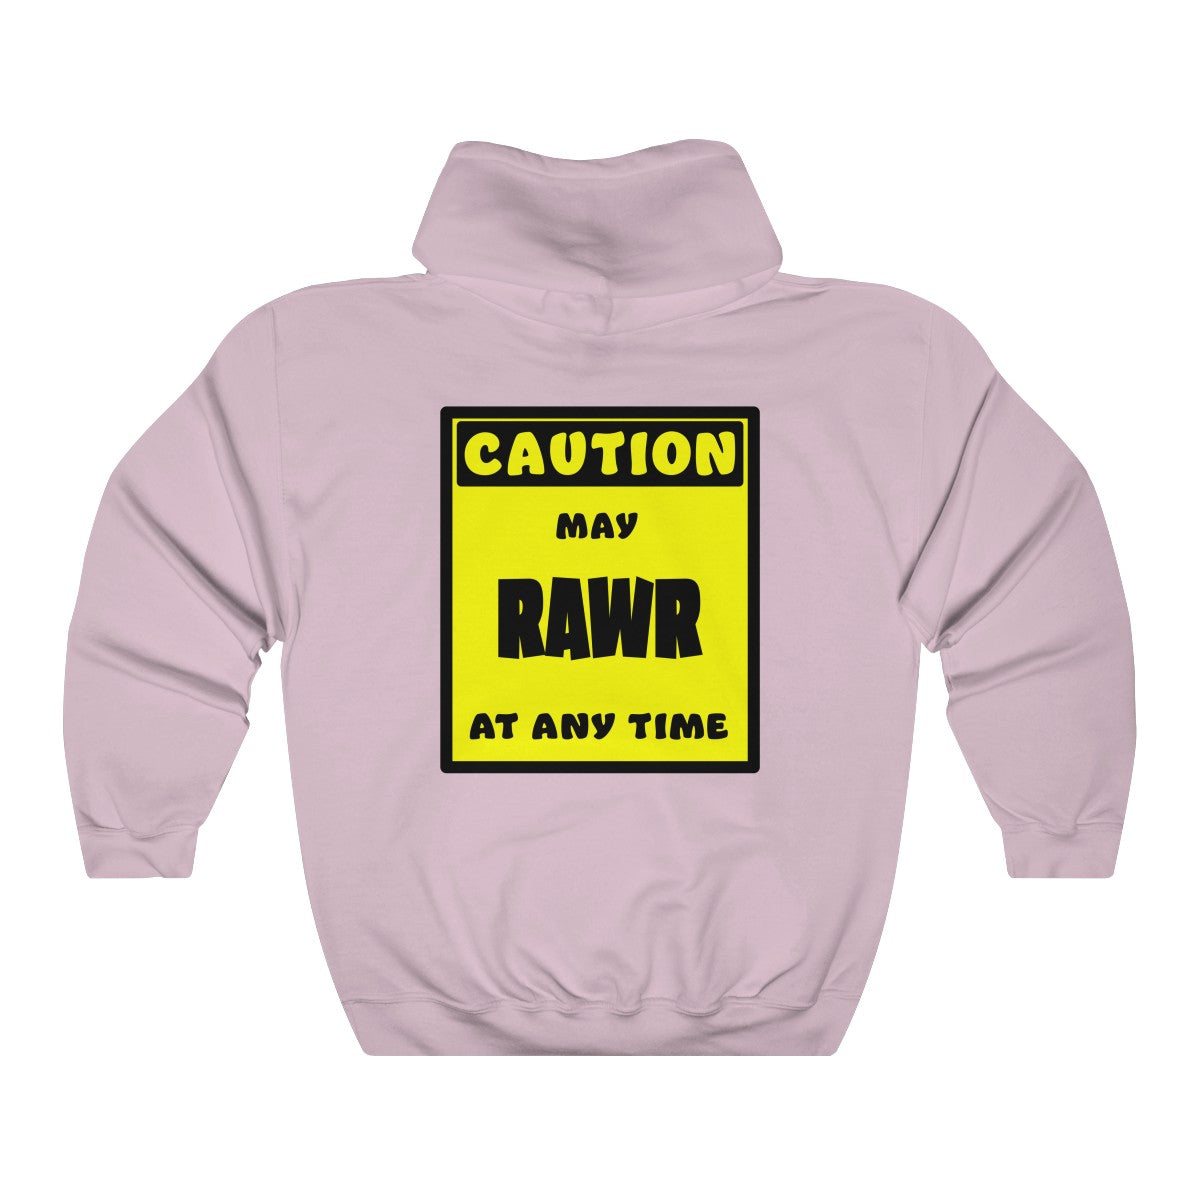 CAUTION! May RAWR at any time! - Hoodie Hoodie AFLT-Whootorca Light Pink S 